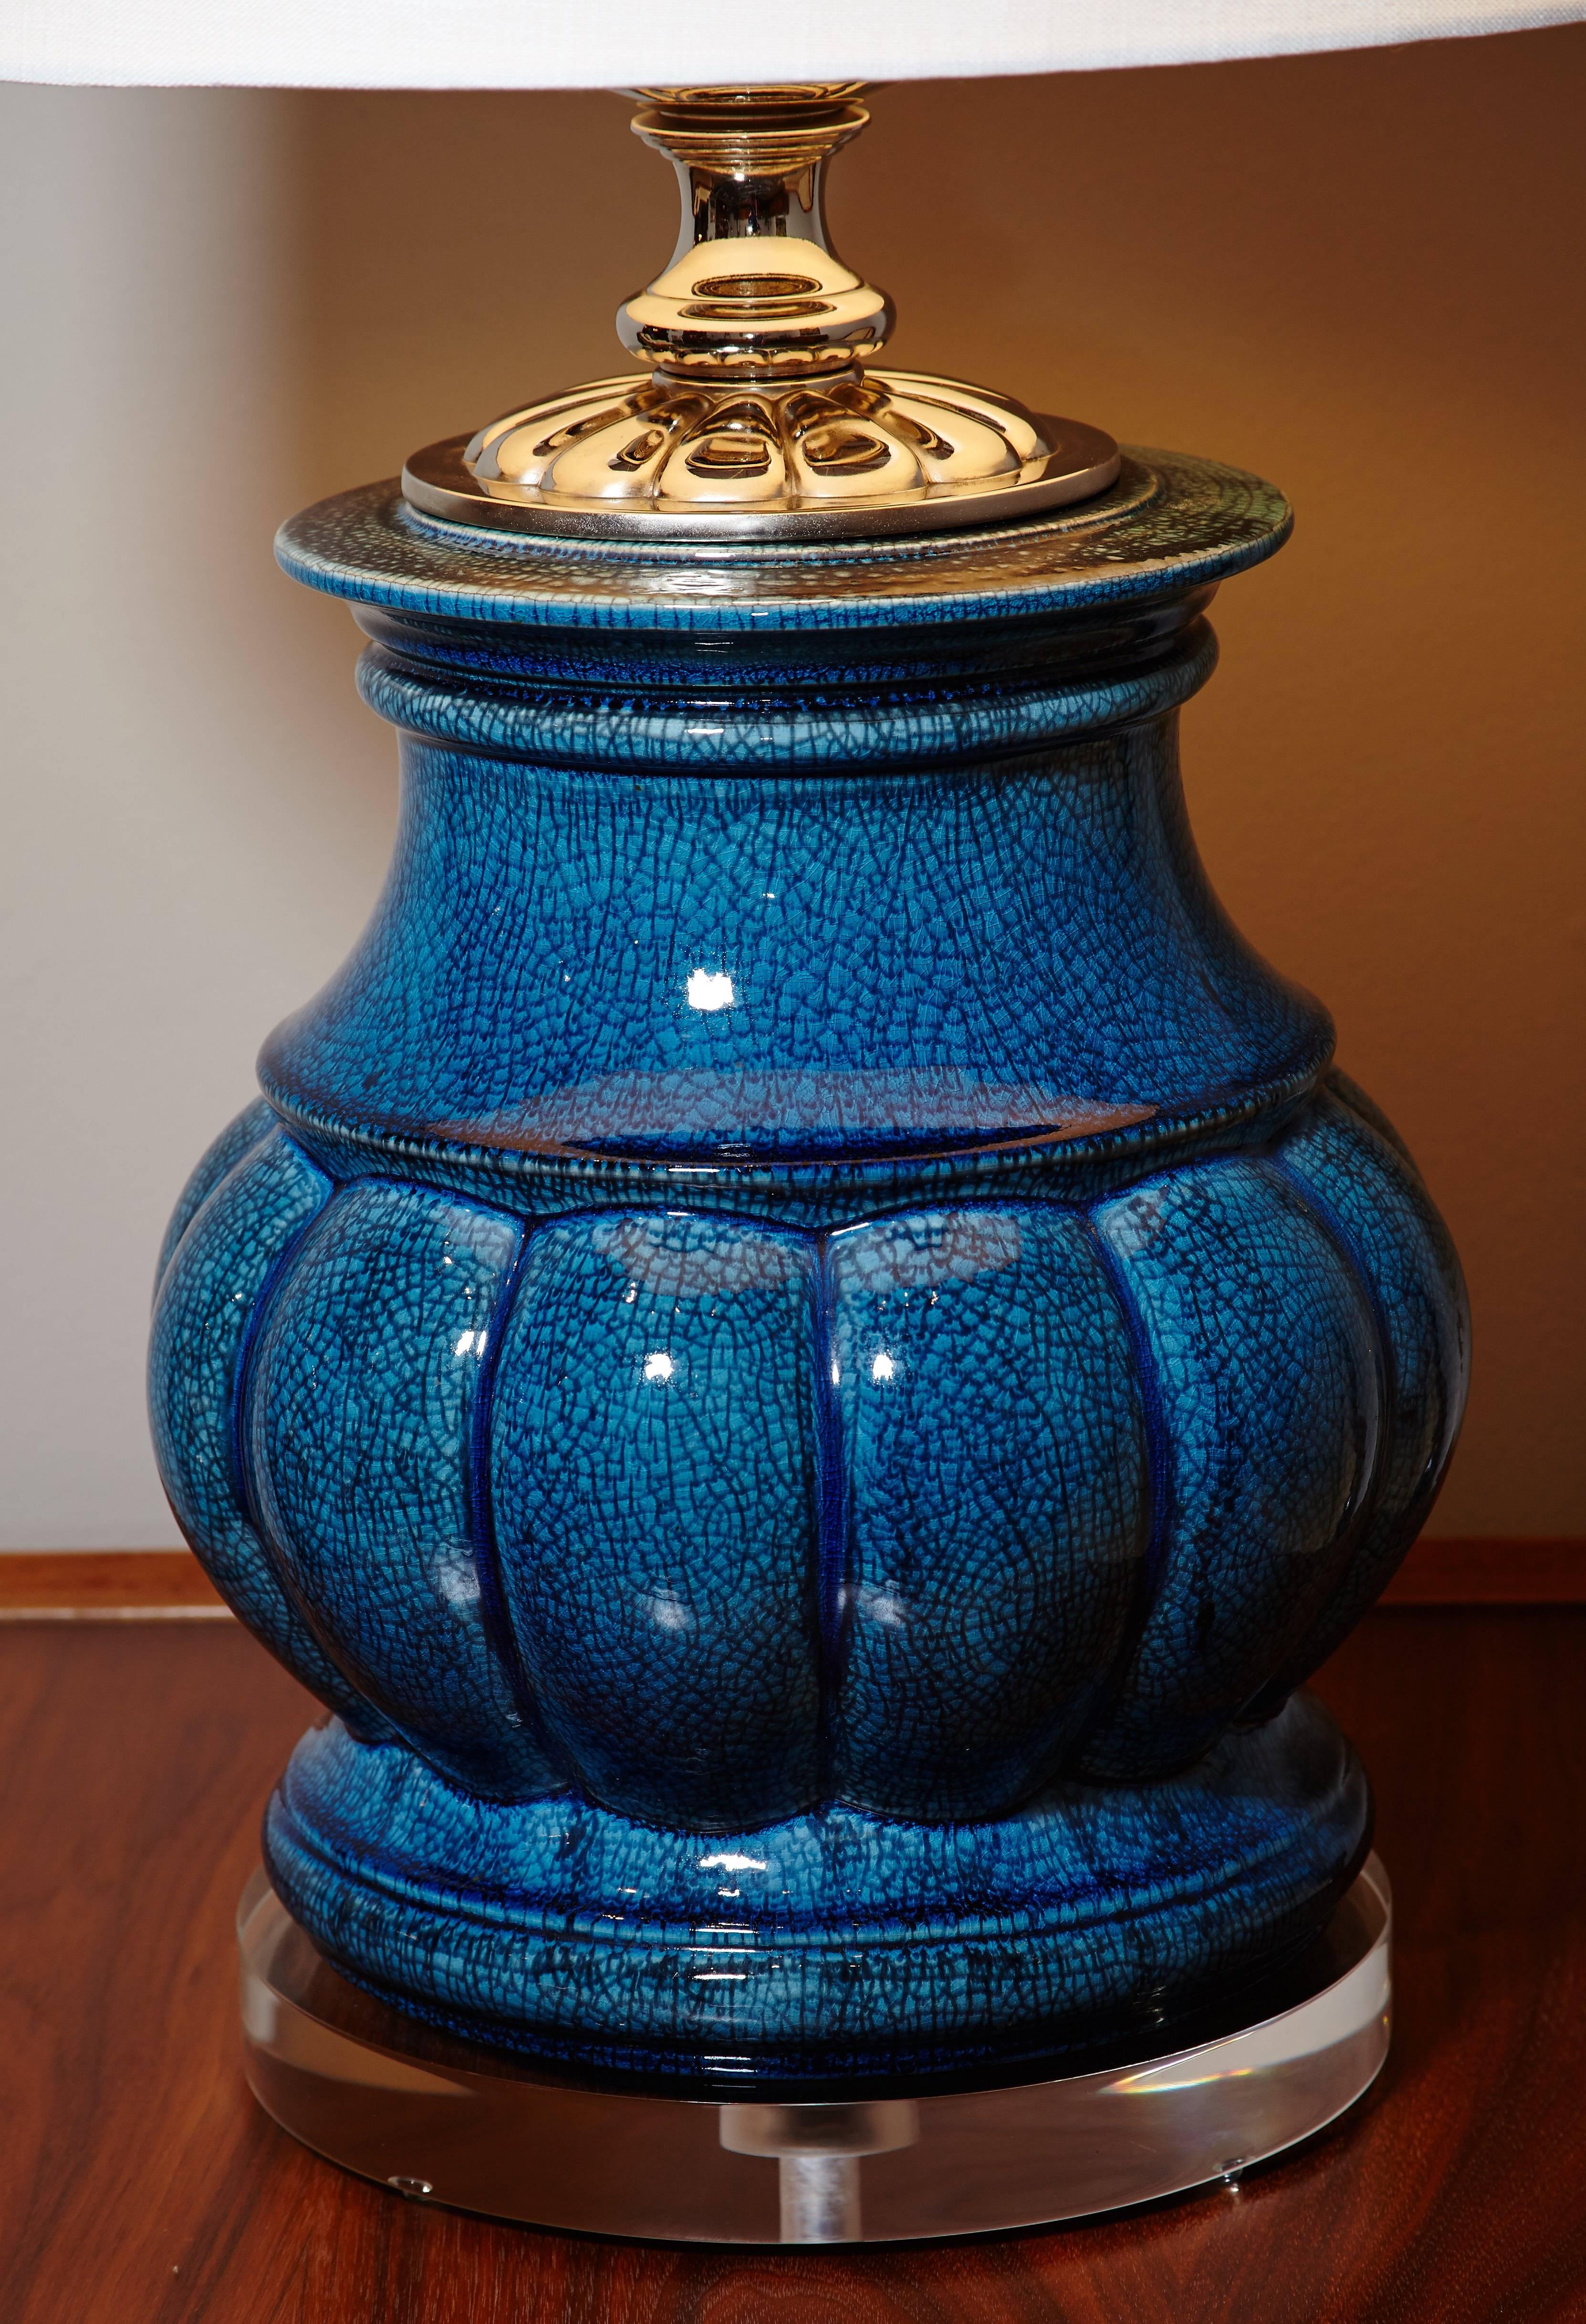 Beautiful turquoise crackle glaze with the original metal mounts now nickel-plated and mounted on a custom Lucite base.